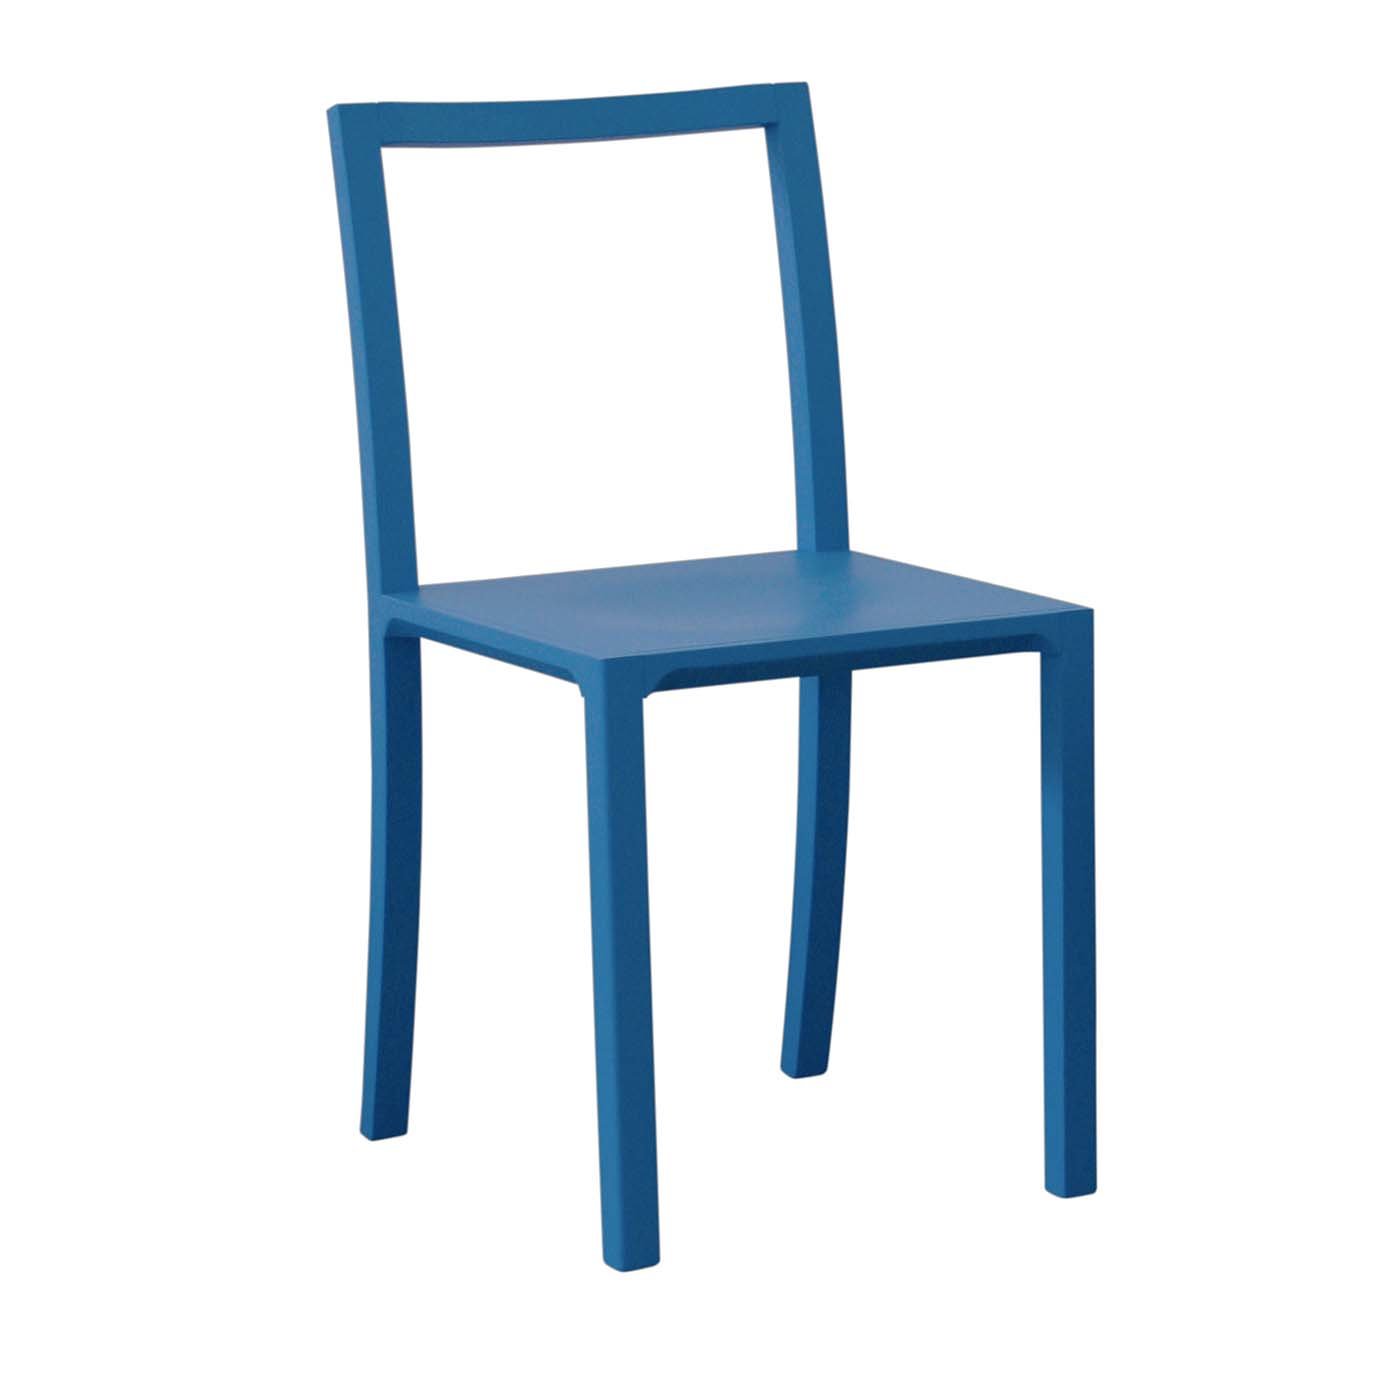 Framework Set of 2 Blue Chairs by Steffen Kehrle - Main view